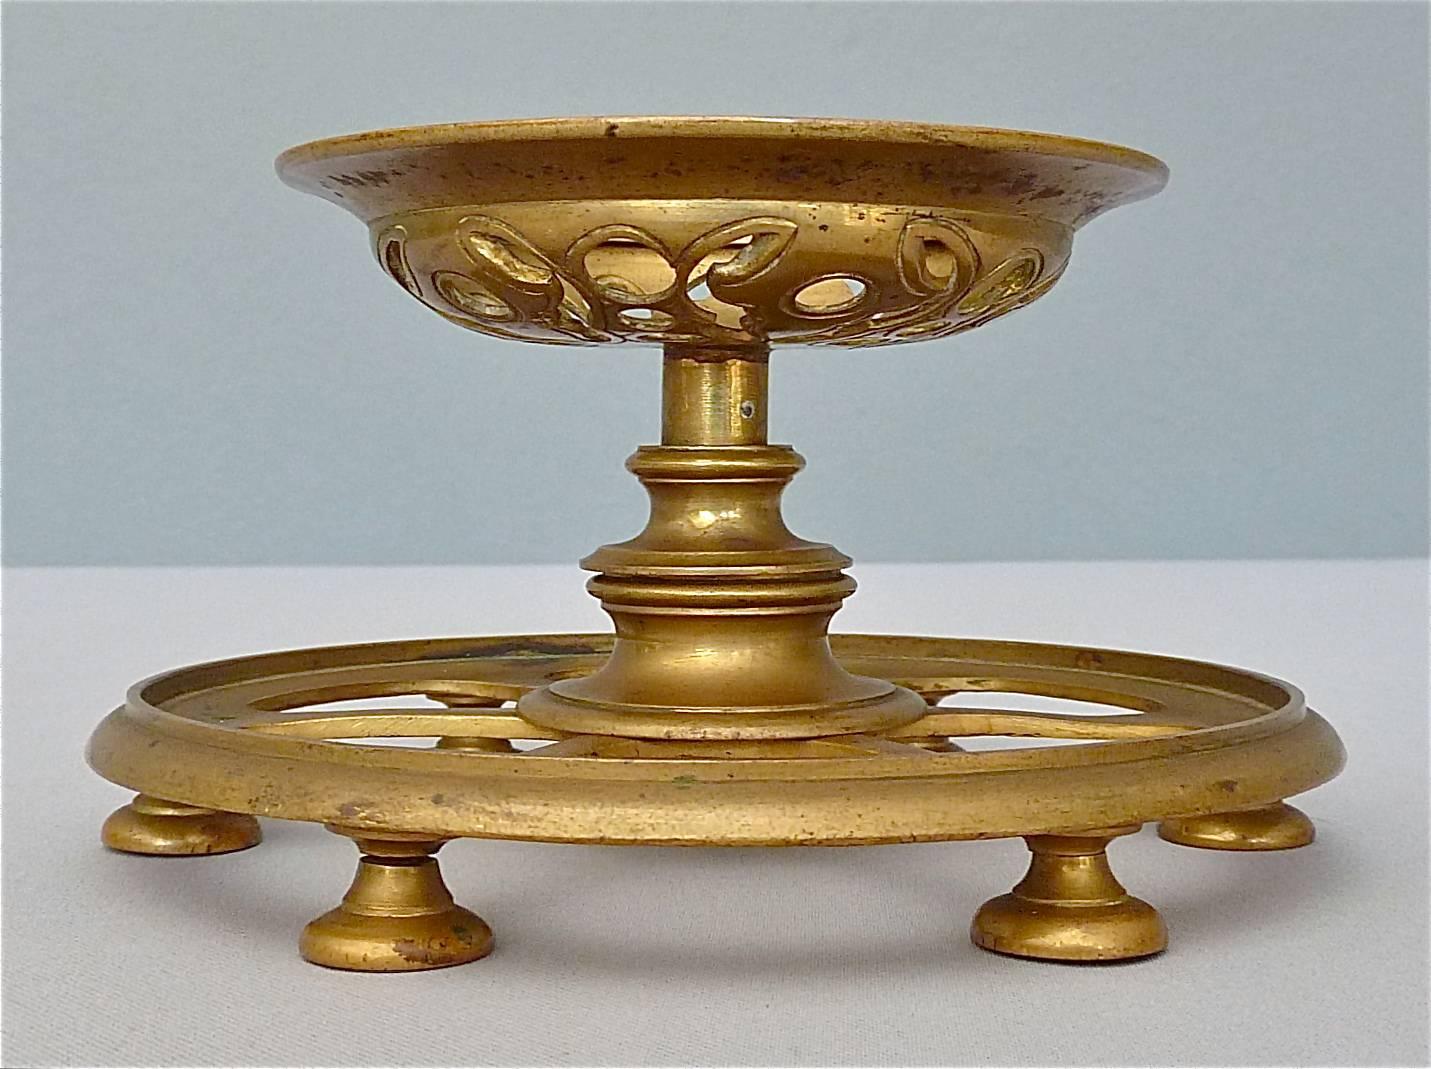 Very rare and fabulous of vintage pair of antique brass candleholder made by the exclusive company Lobmeyr in Vienna around 1890-1920. They have a great pattern in oriental style which was typical for the period of the Art Nouveau and Art Deco. The